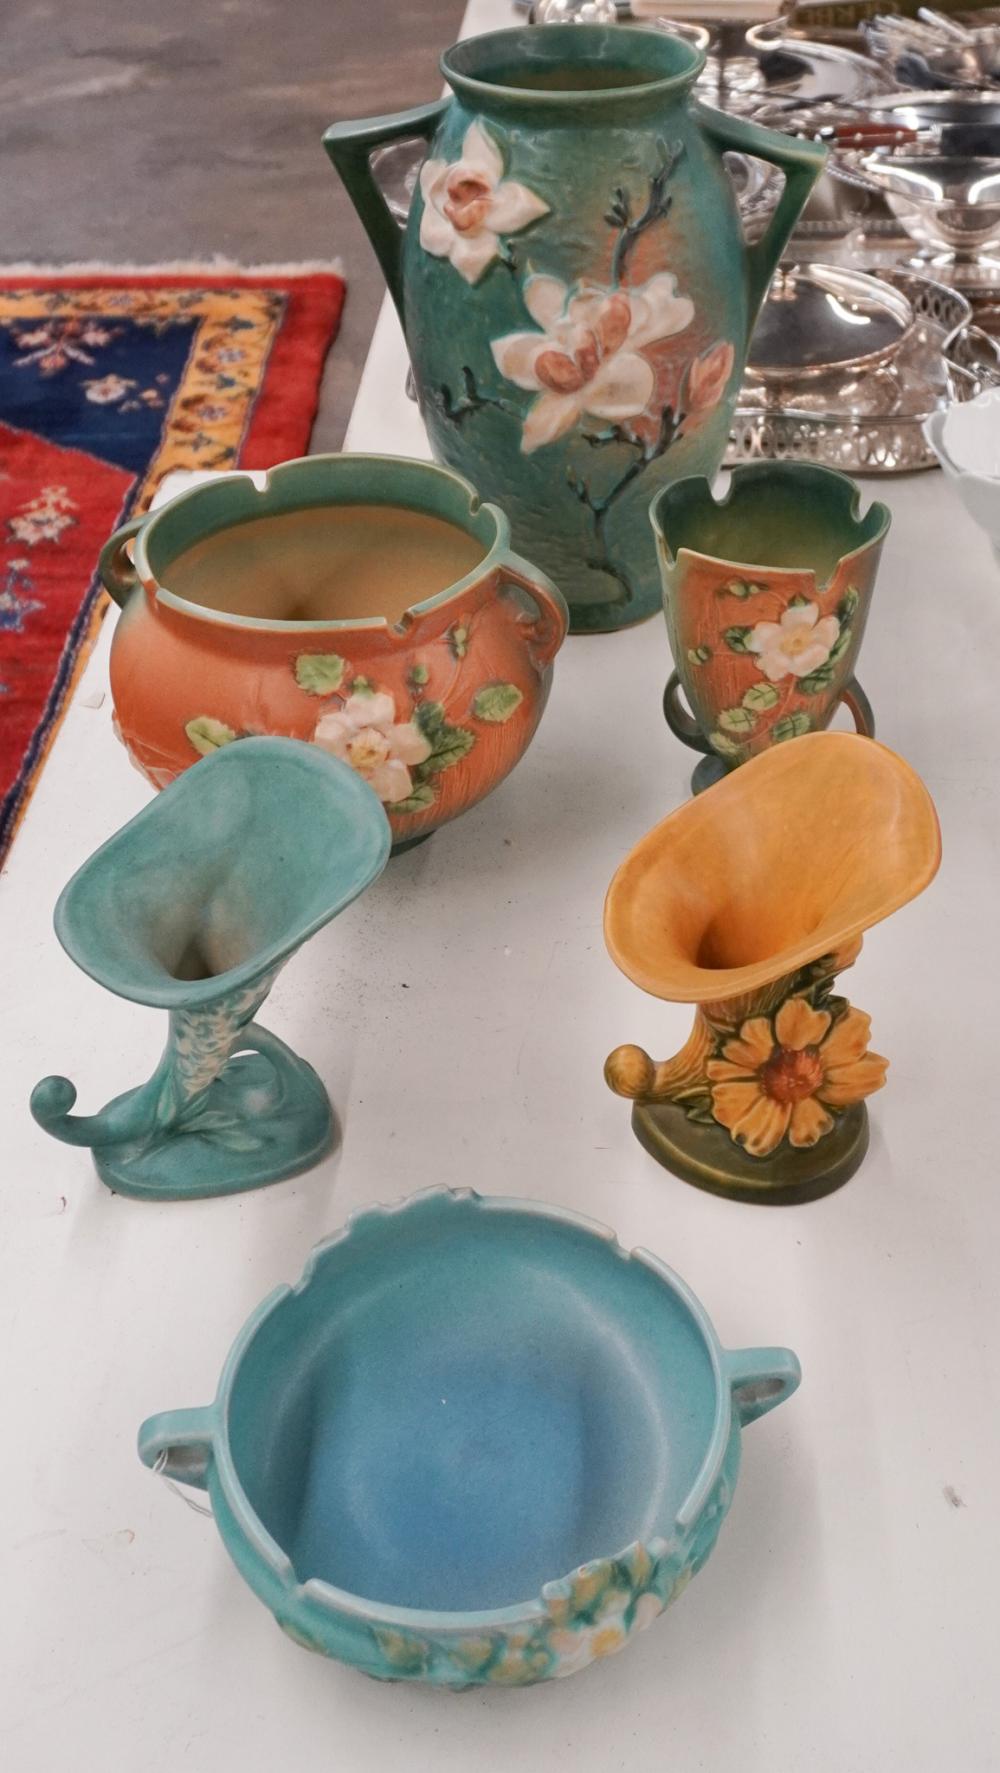 SIX ROSEVILLE POTTERY TABLE ARTICLES,